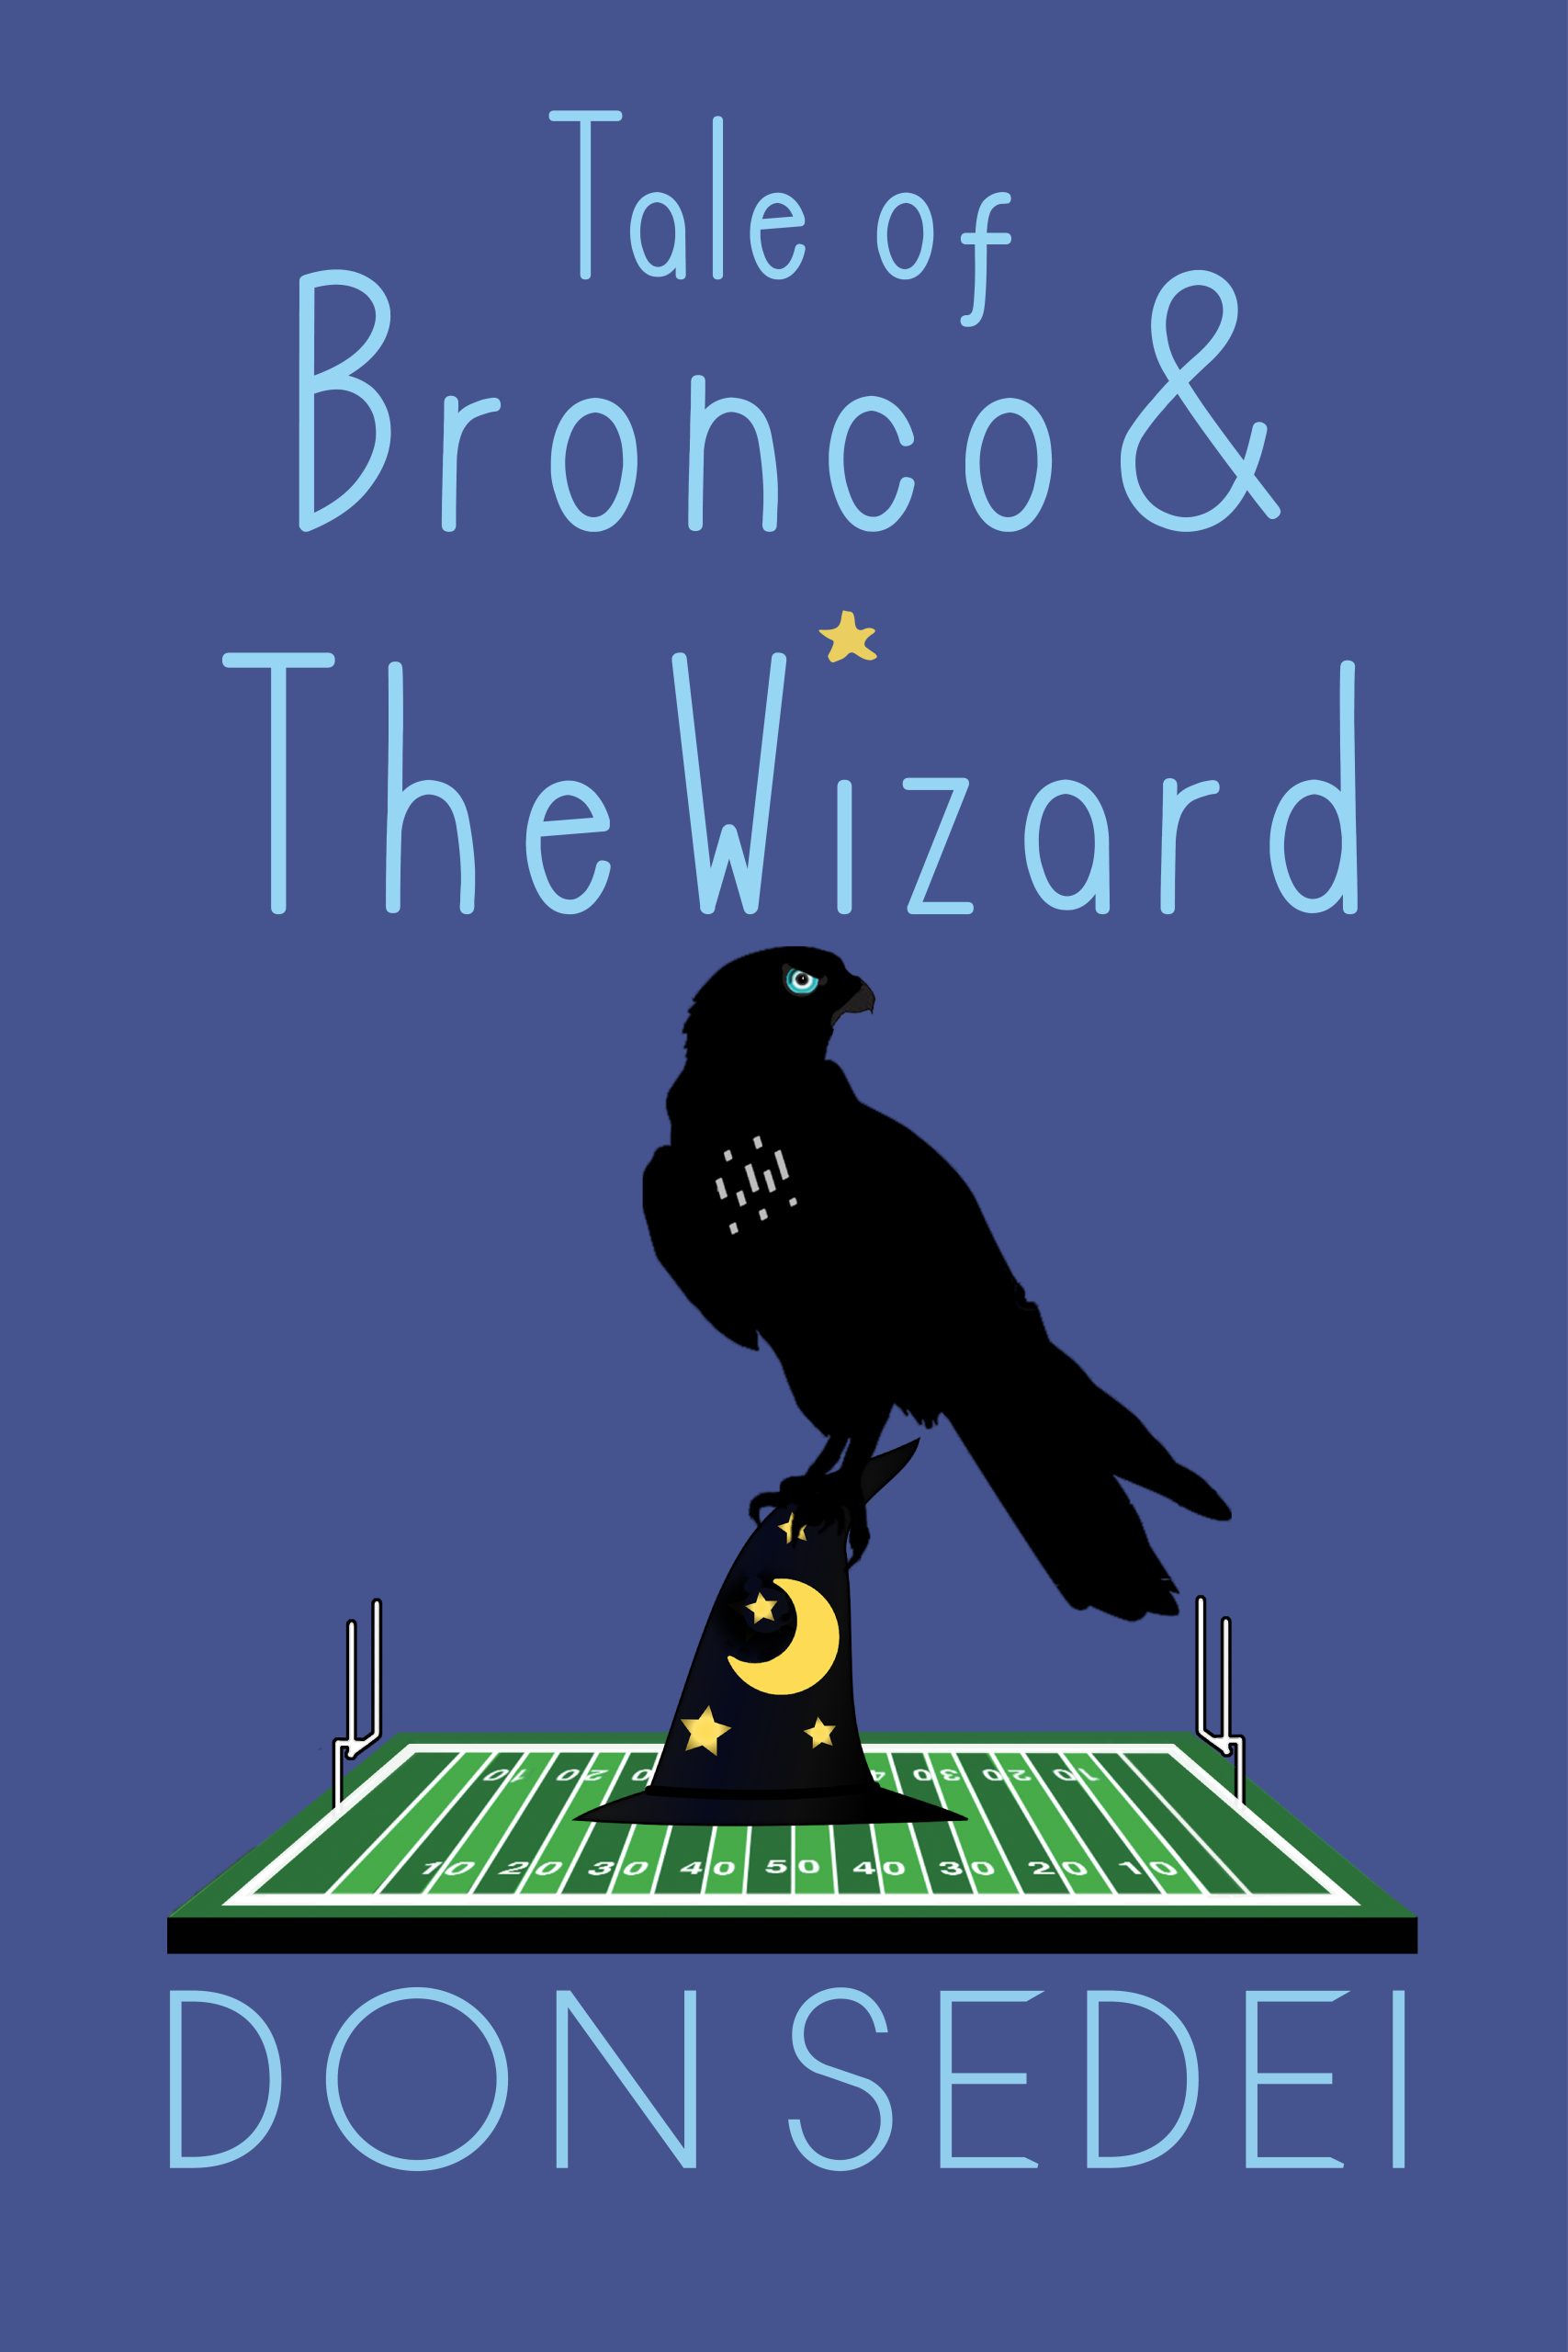 Book cover for Tale of Bronco & The Wizard, available to option through OptionAvenue